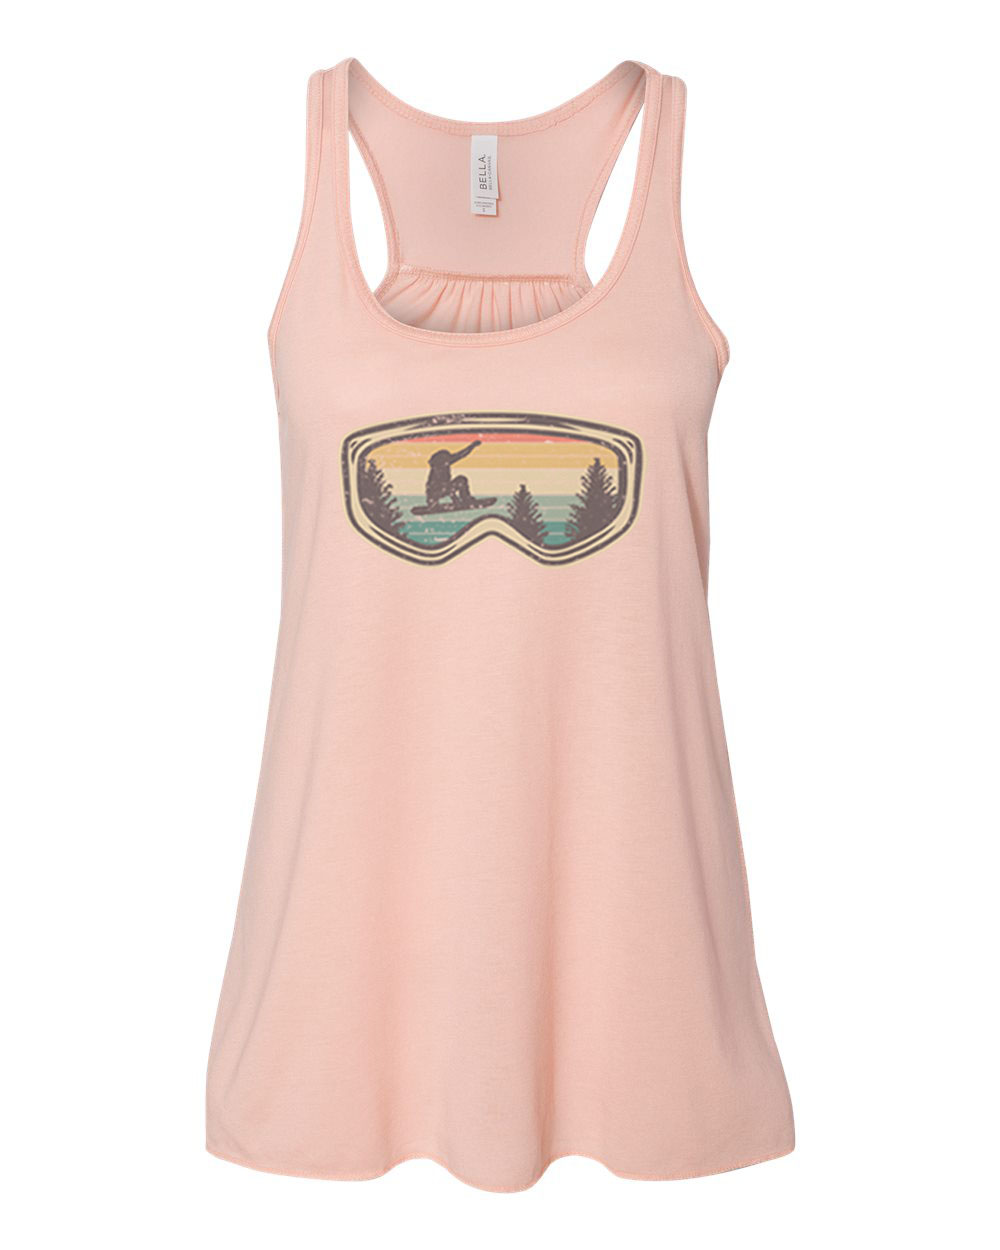 "Women's Snowboarding Tank Top, Snowboard Goggles, Racerback, Soft Bella Canvas, Snowboard Shirt, Gift For Her, Skiing Apparel, Snow Goggles, Peach, LARGE" - image 1 of 1